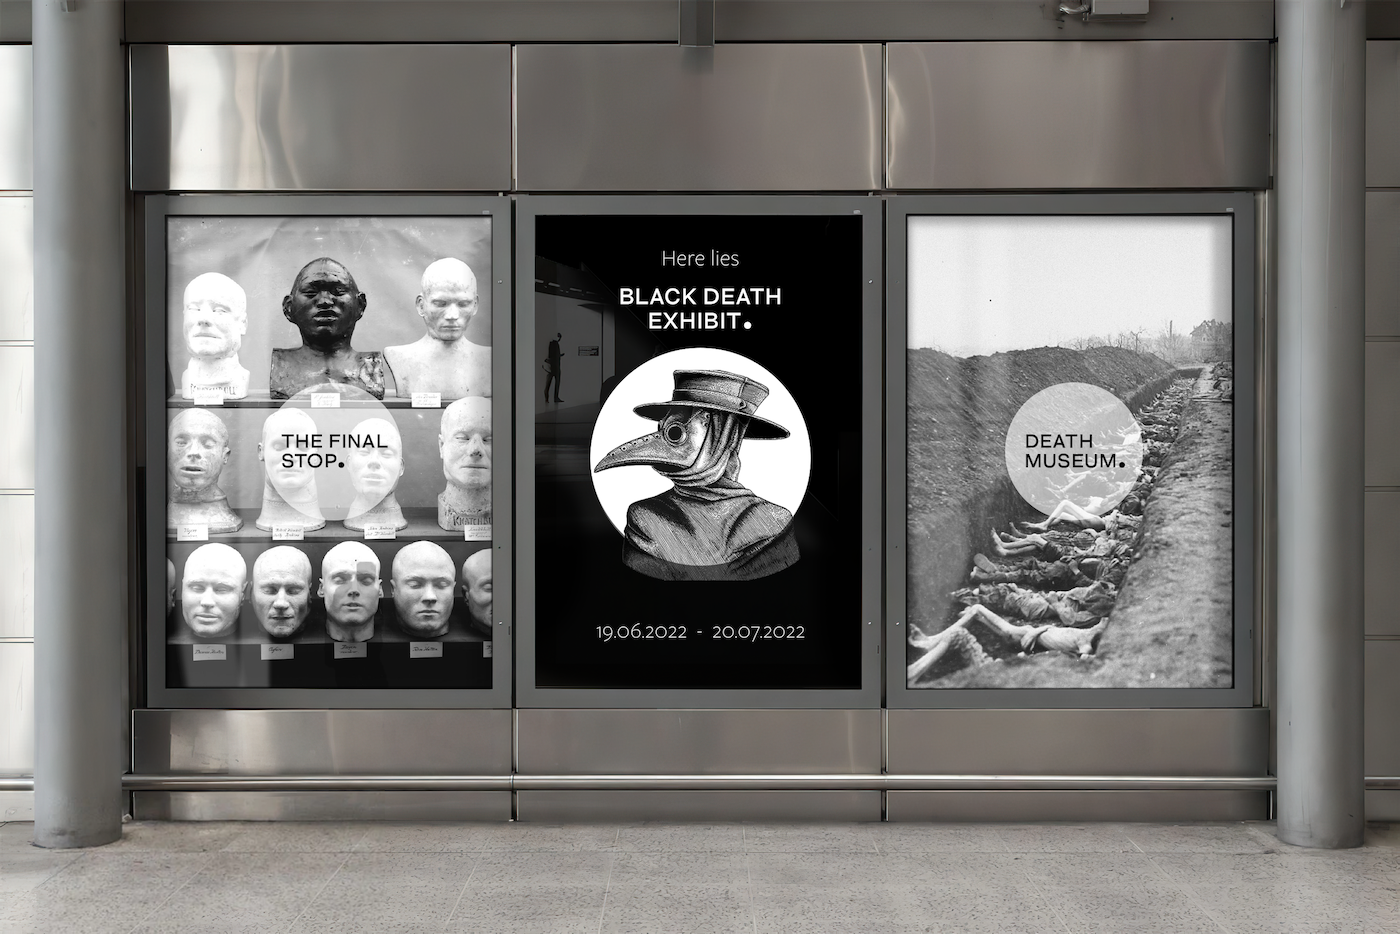 Three black and white posters promoting The Death Museum. On the left, a photograph of sculpted heads on shelves, with a circle shape in the centre and 'The final stop' written in black text. In the centre, a black background with a white circle in the middle. Inside the circle is a Plague Doctor. Above the circle in white text, 'Here lies Black Death Exhibit'. The final poster shows a black and white photo of bodies piled in trenches, with a faded white circle in the centre saying 'Death Museum' in black text. By Holly Carr, BA Graphic Communication